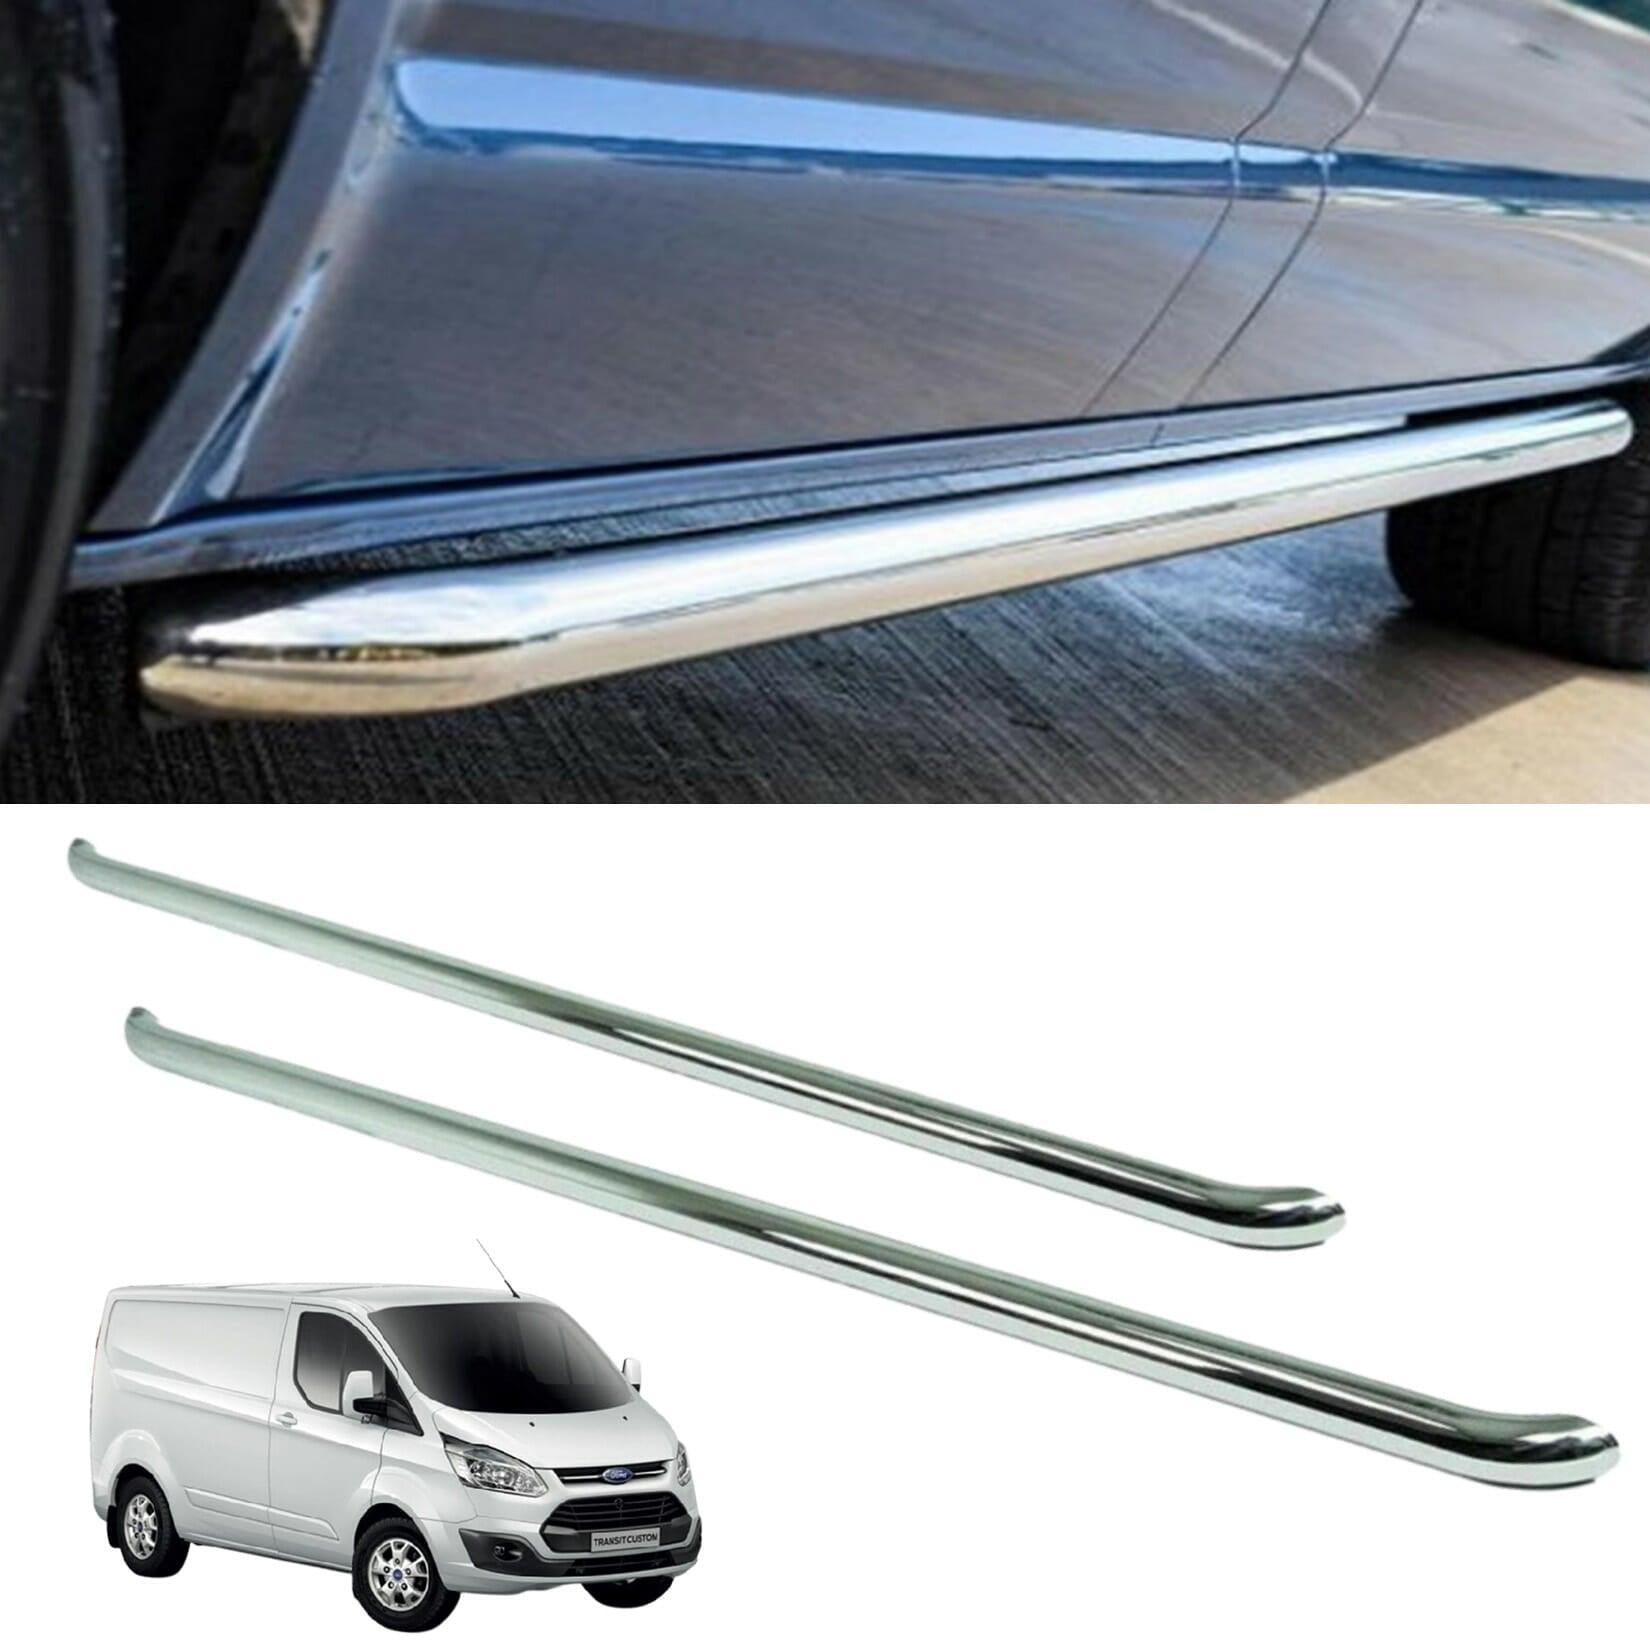 FORD TRANSIT CUSTOM SWB 2012-2017 2.4 INCH STAINLESS STEEL OE STYLE SPORTLINE SIDE BARS - PAIR - - Storm Xccessories2